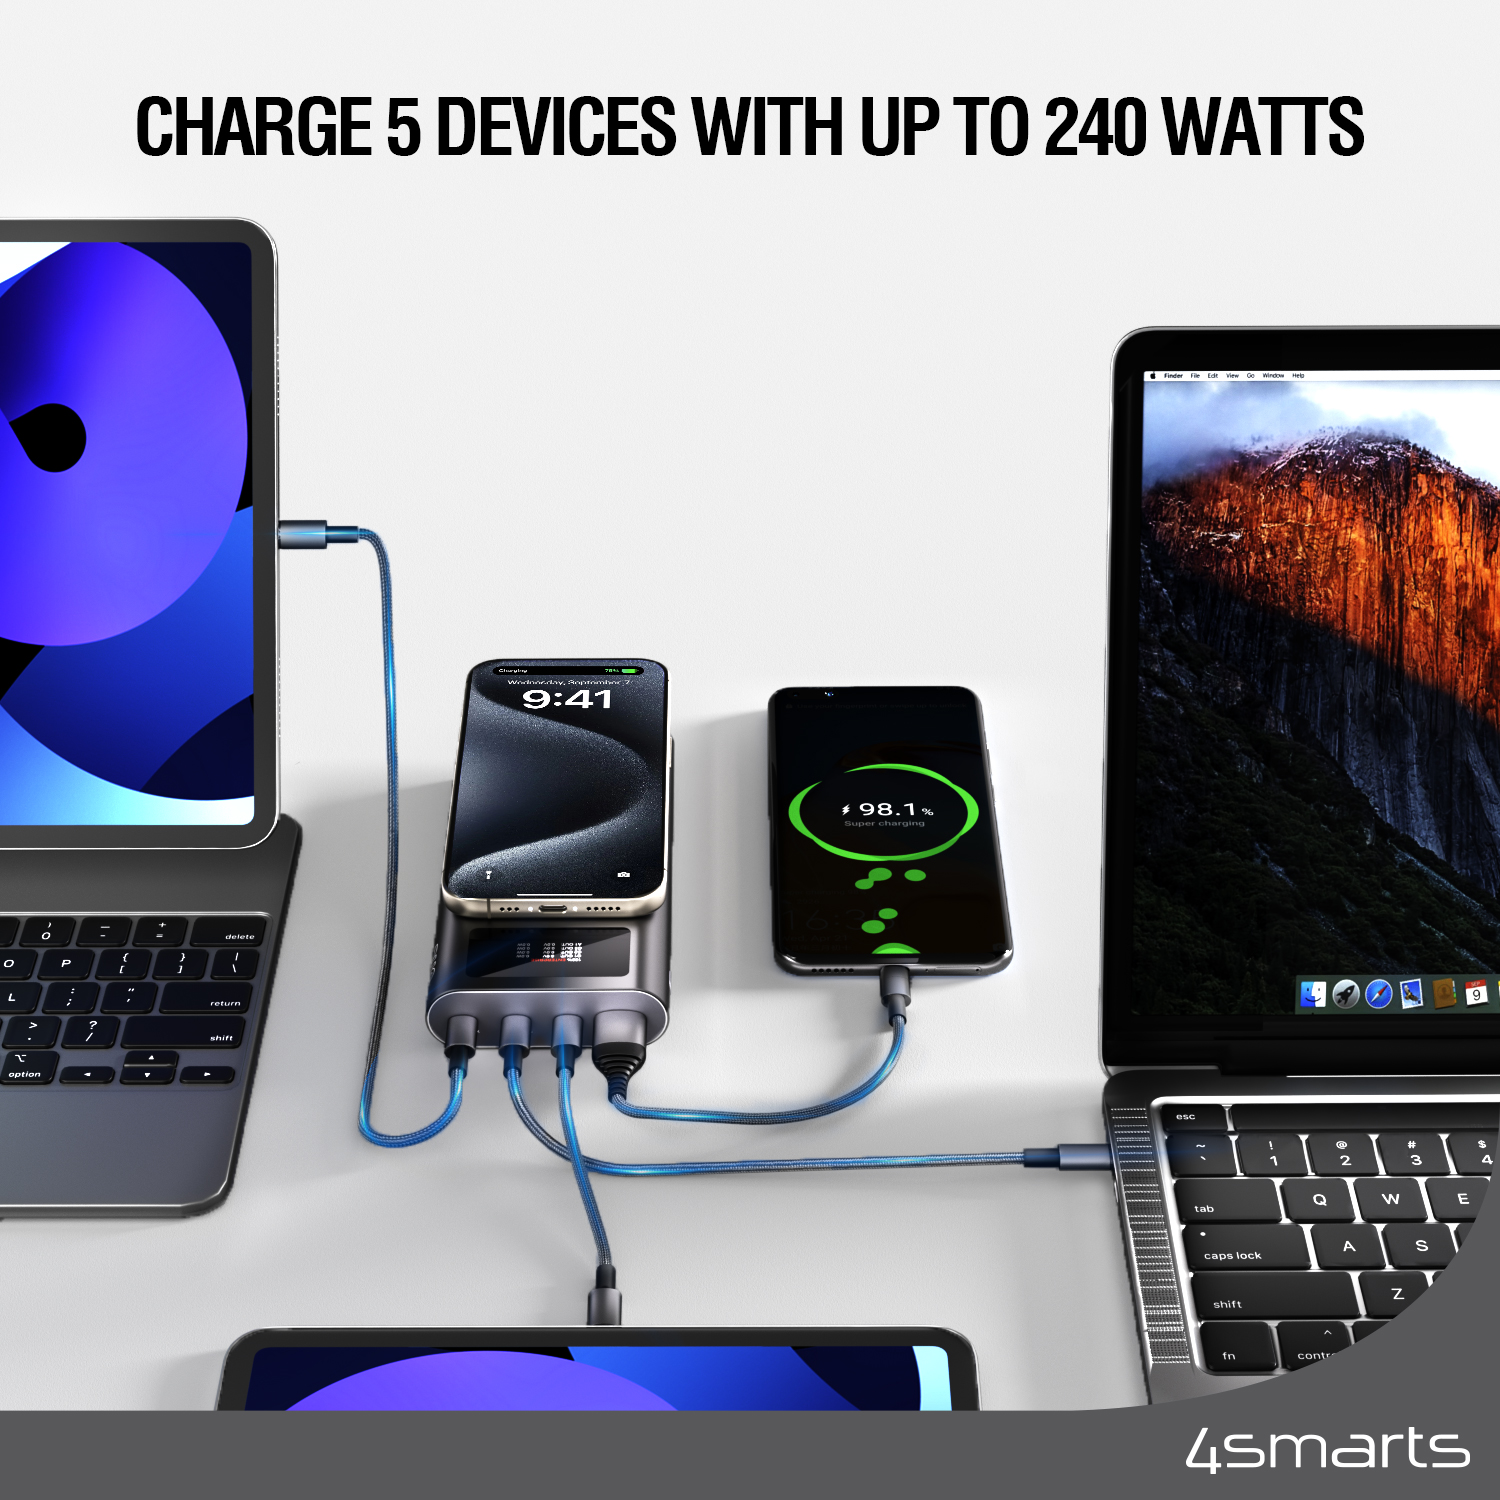 With the 4smarts Enterprise Ultra Powerbank with 26800mAh charging capacity you can charge 5 devices simultaneously with up to 240W.